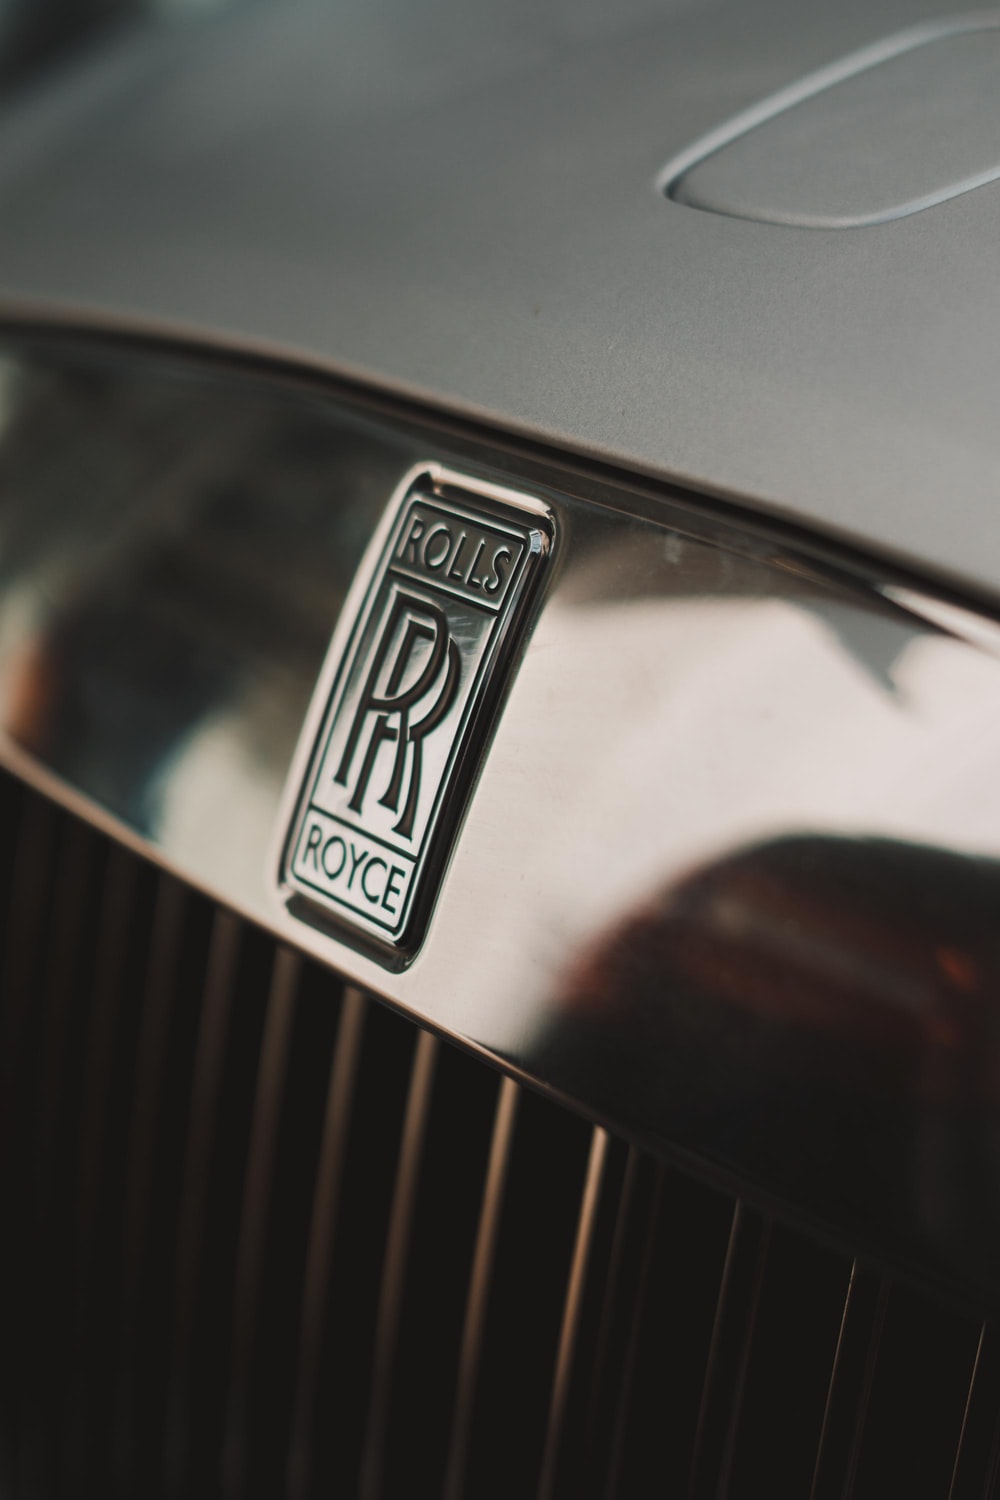 Rolls Royce Logo Picture. Download Free Image